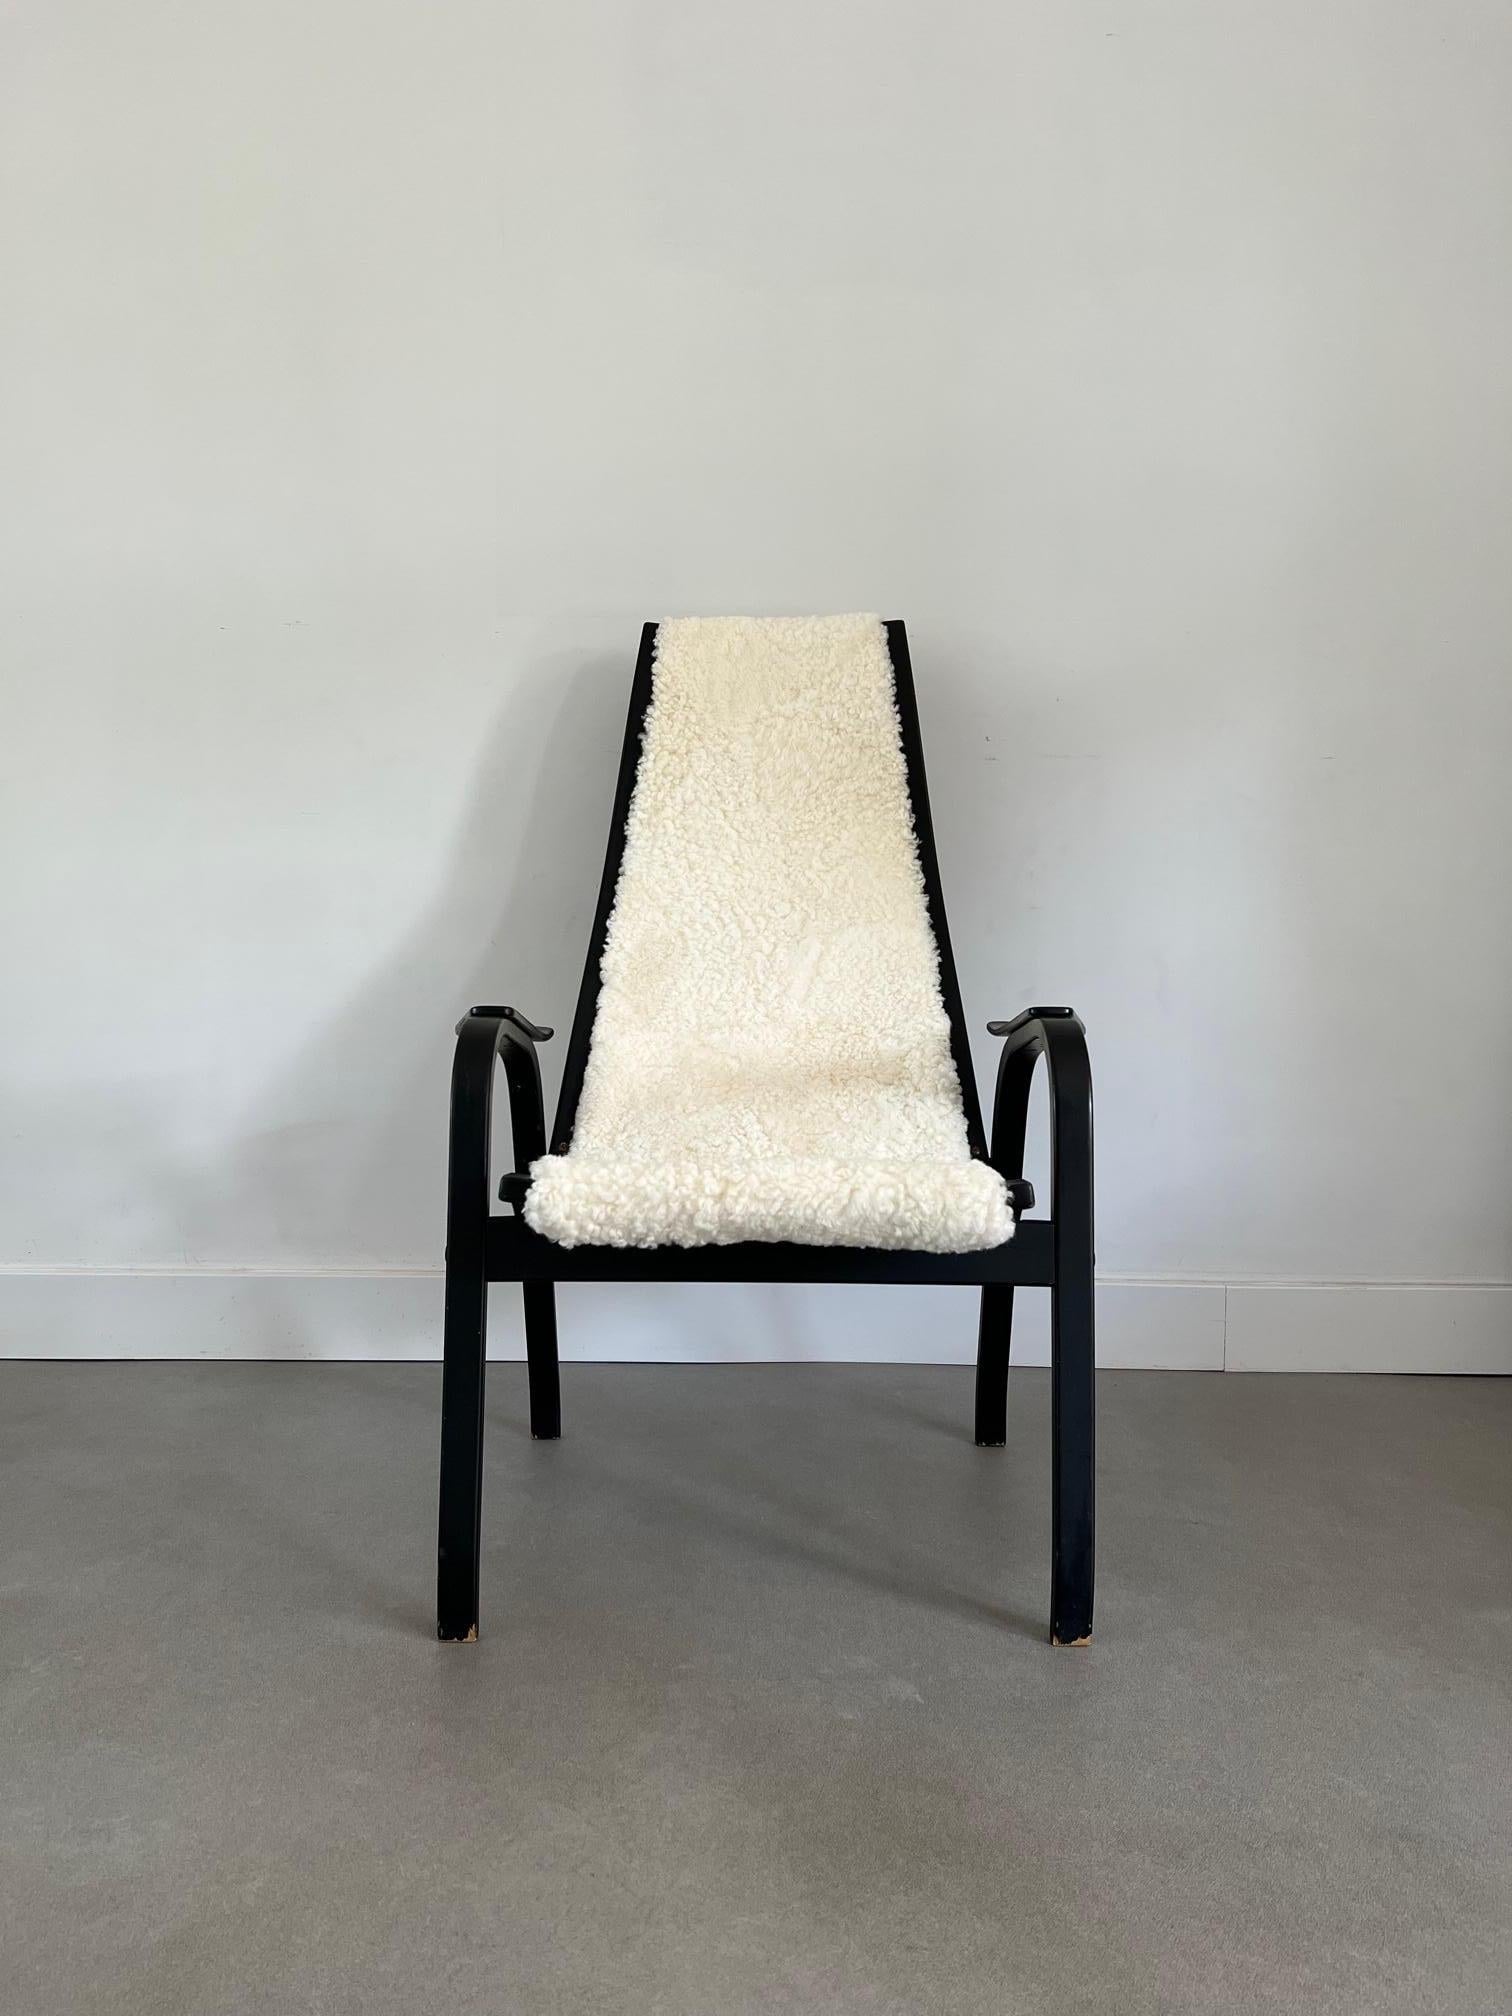 I feel this is a very feminine chair due to it's thin yet curvy posture. It's old and the frame is telling you that in a nice patinated way. The old sheepskin was completely worn out. So this chair got herself a new sheepskin dress.

About the